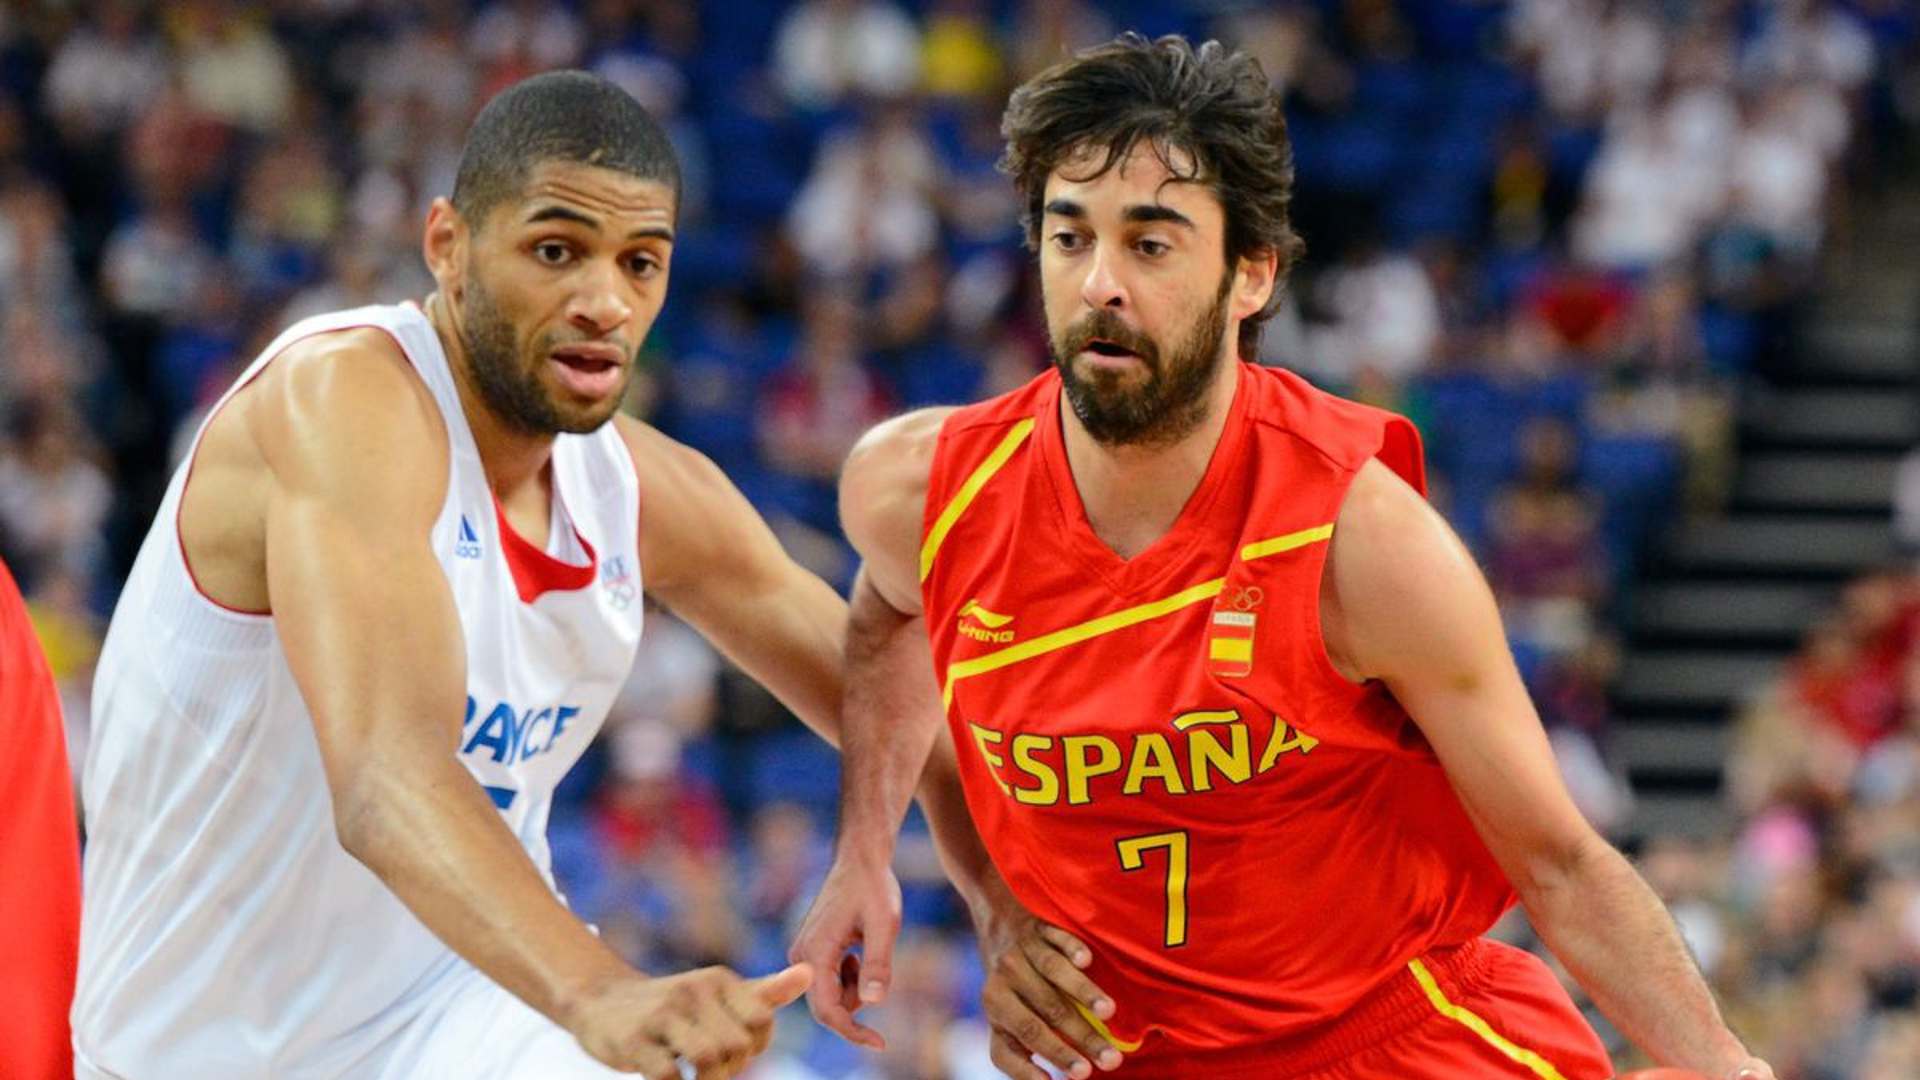 The EuroBasket 2022 quarter-finals match between Spain vs Finland Republic will be held at Arena Berlin (Image credits: Twitter)